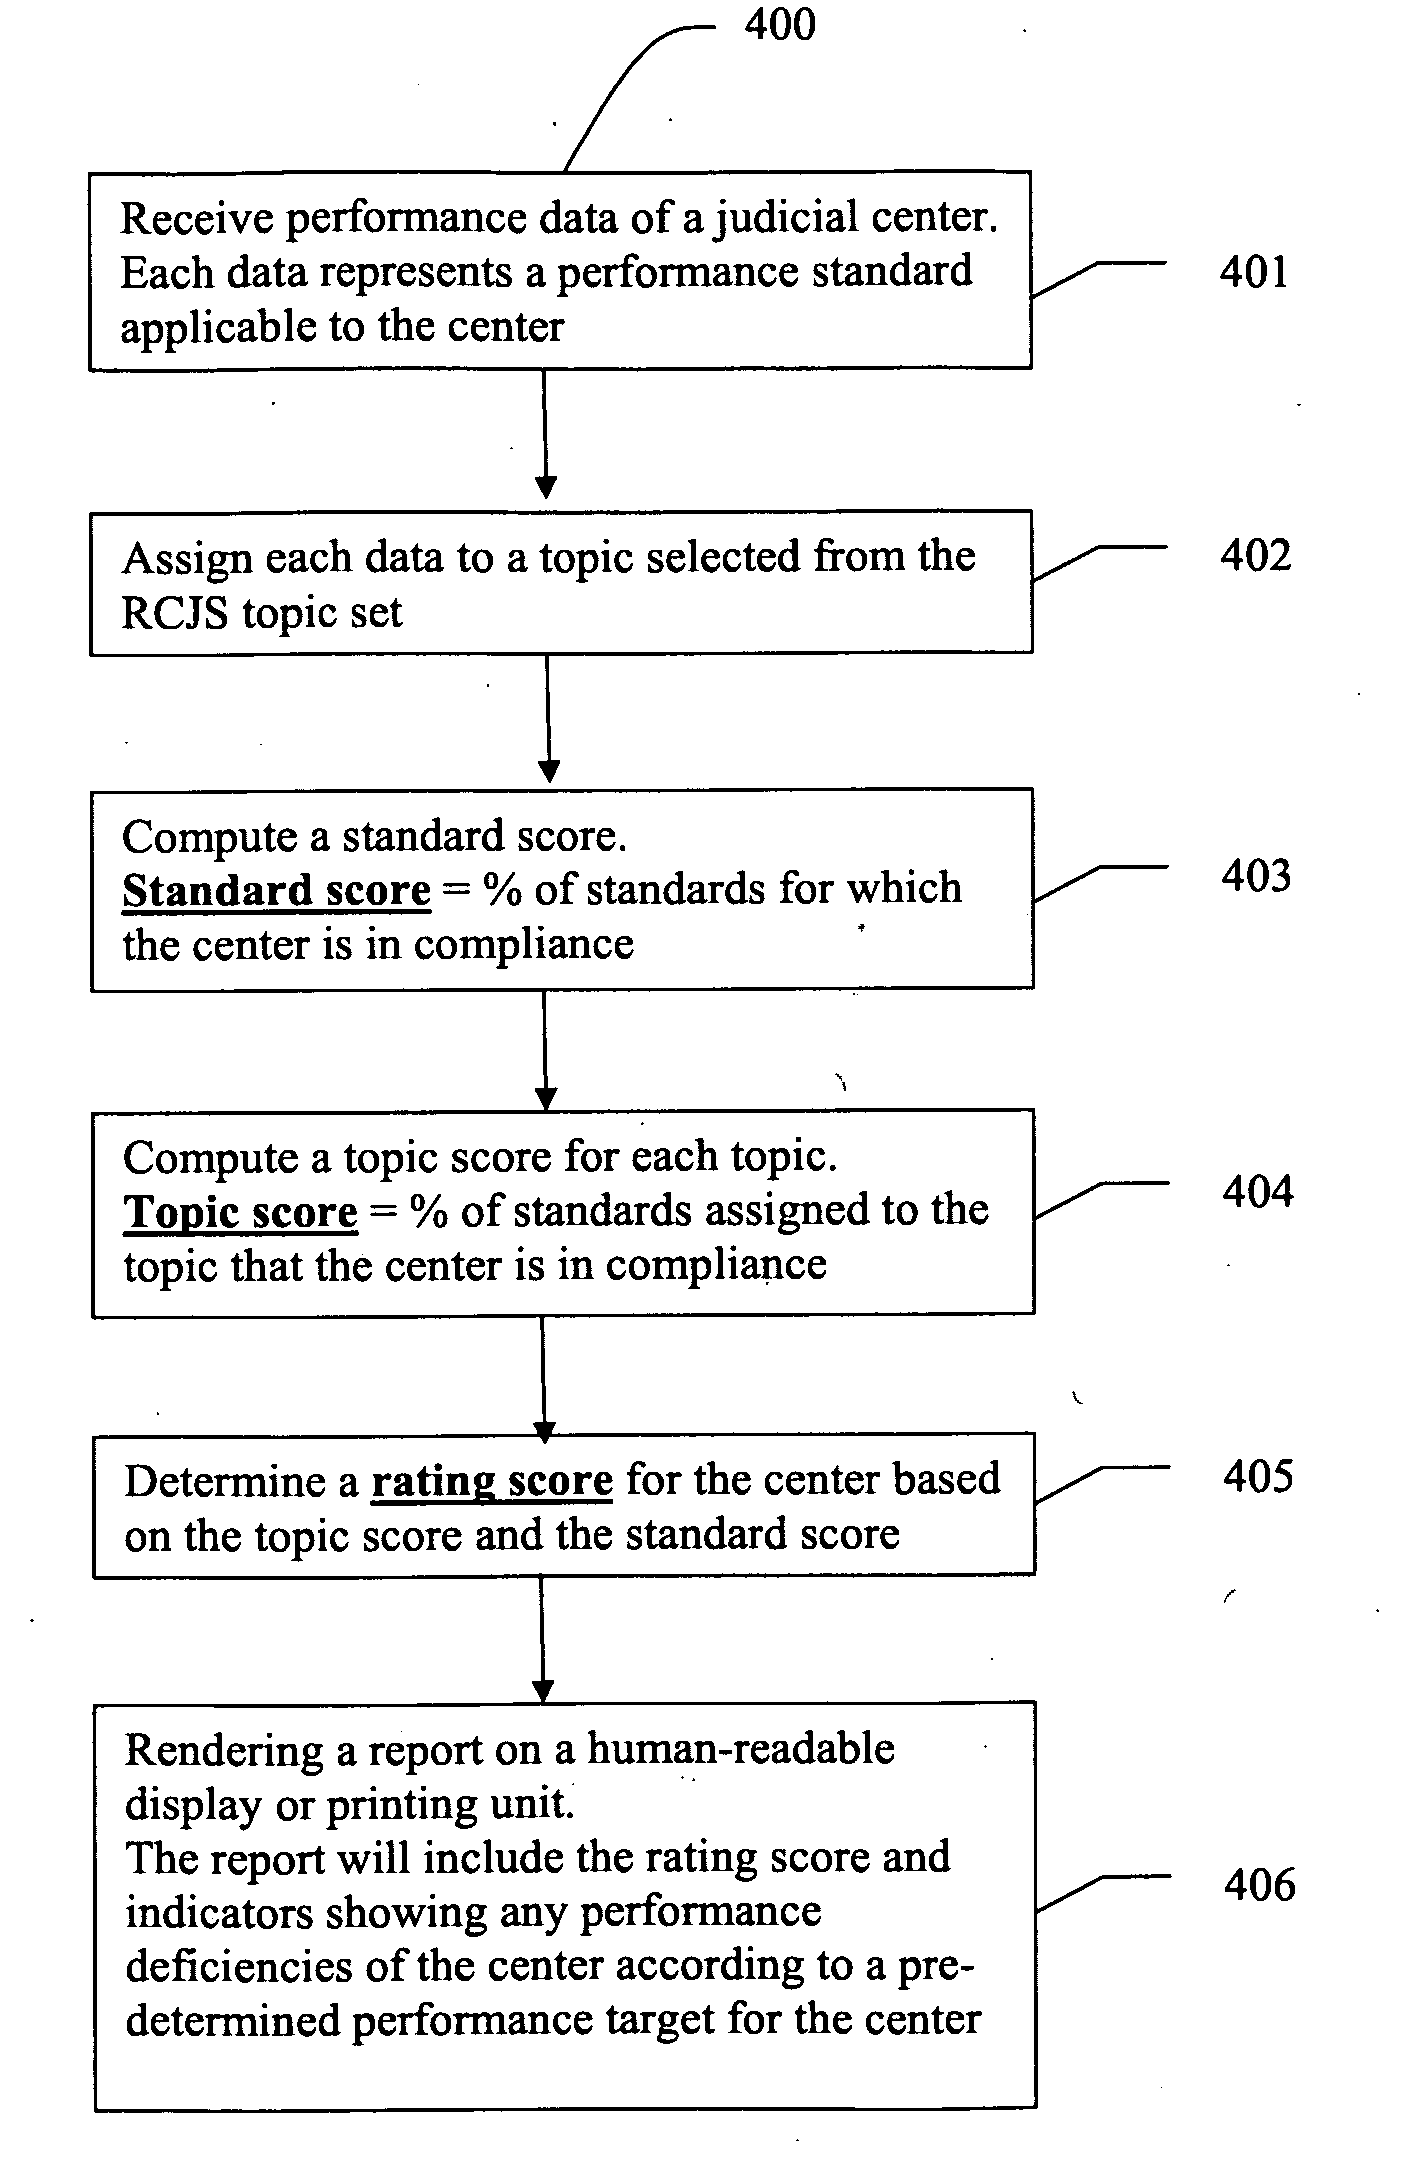 Methods and systems for evaluating judicial system